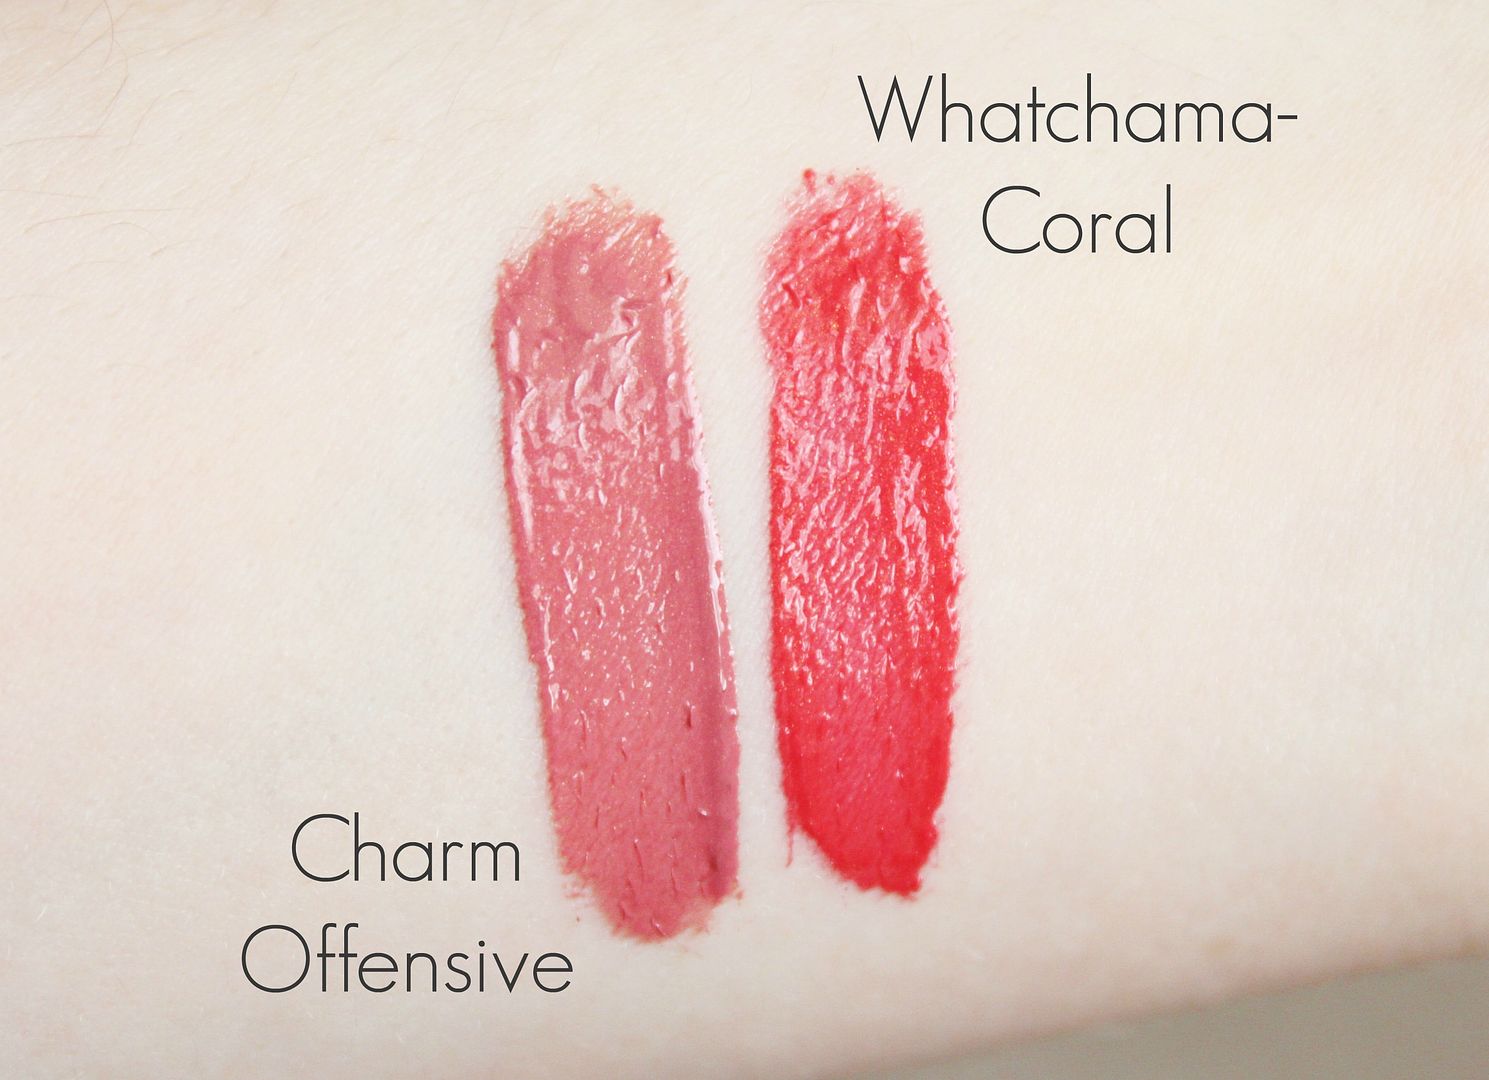 Soap And Glory Sexy Mother Pucker Lip Lacquers What Cha Ma Coral Charm Offensive Bold Spring Lips Swatch Review Belle Amie UK Beauty Fashion Lifestyle Blog